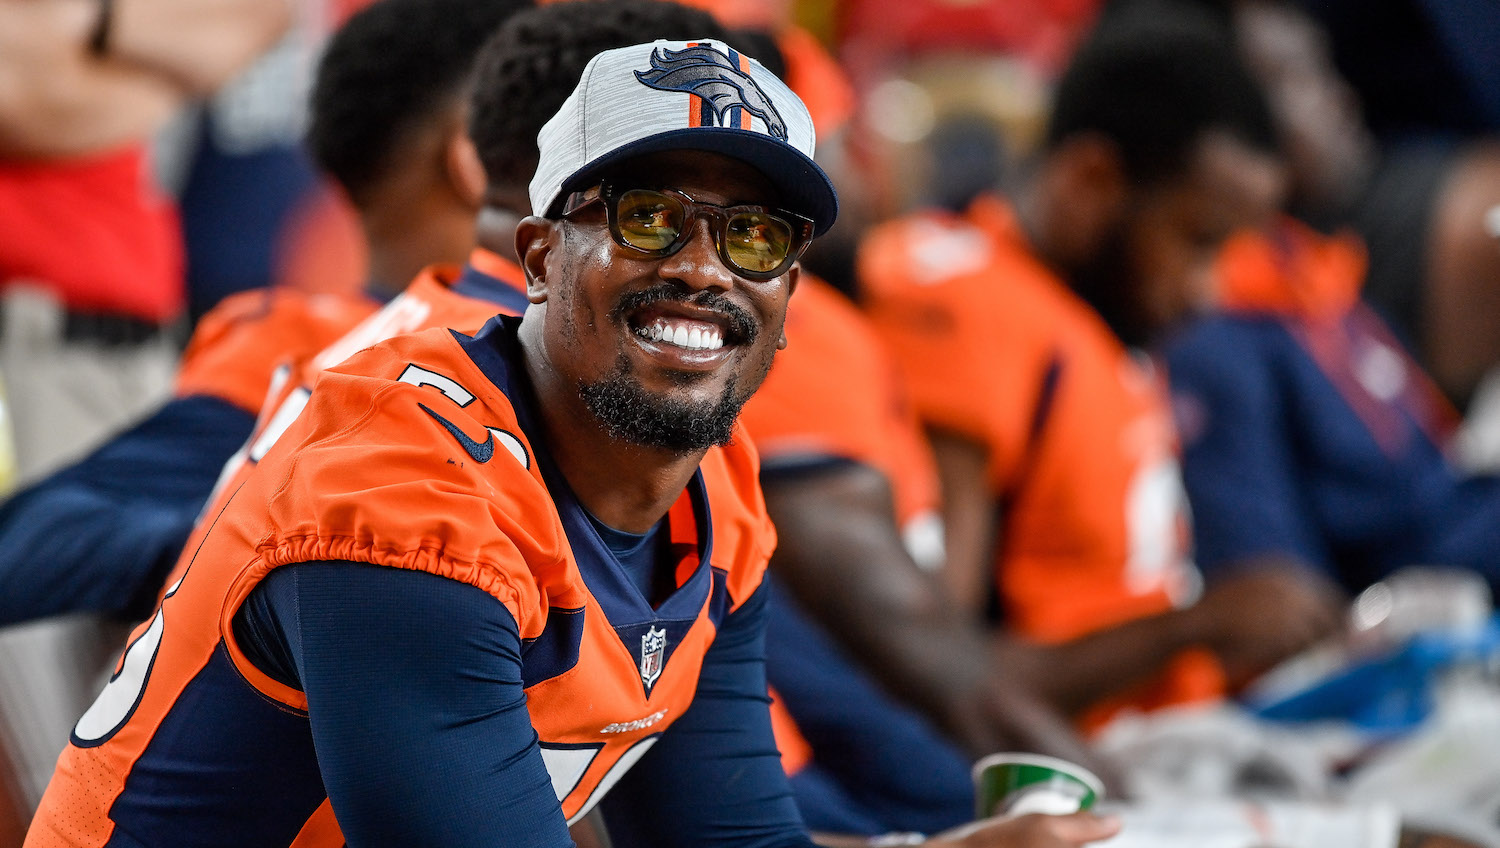 DENVER, CO - AUGUST 28: Von Miller #58 of the Denver Broncos looks on in the bench area during an NFL preseason game against the Los Angeles Rams at Empower Field at Mile High on August 28, 2021 in Denver, Colorado. (Photo by Dustin Bradford/Getty Images)